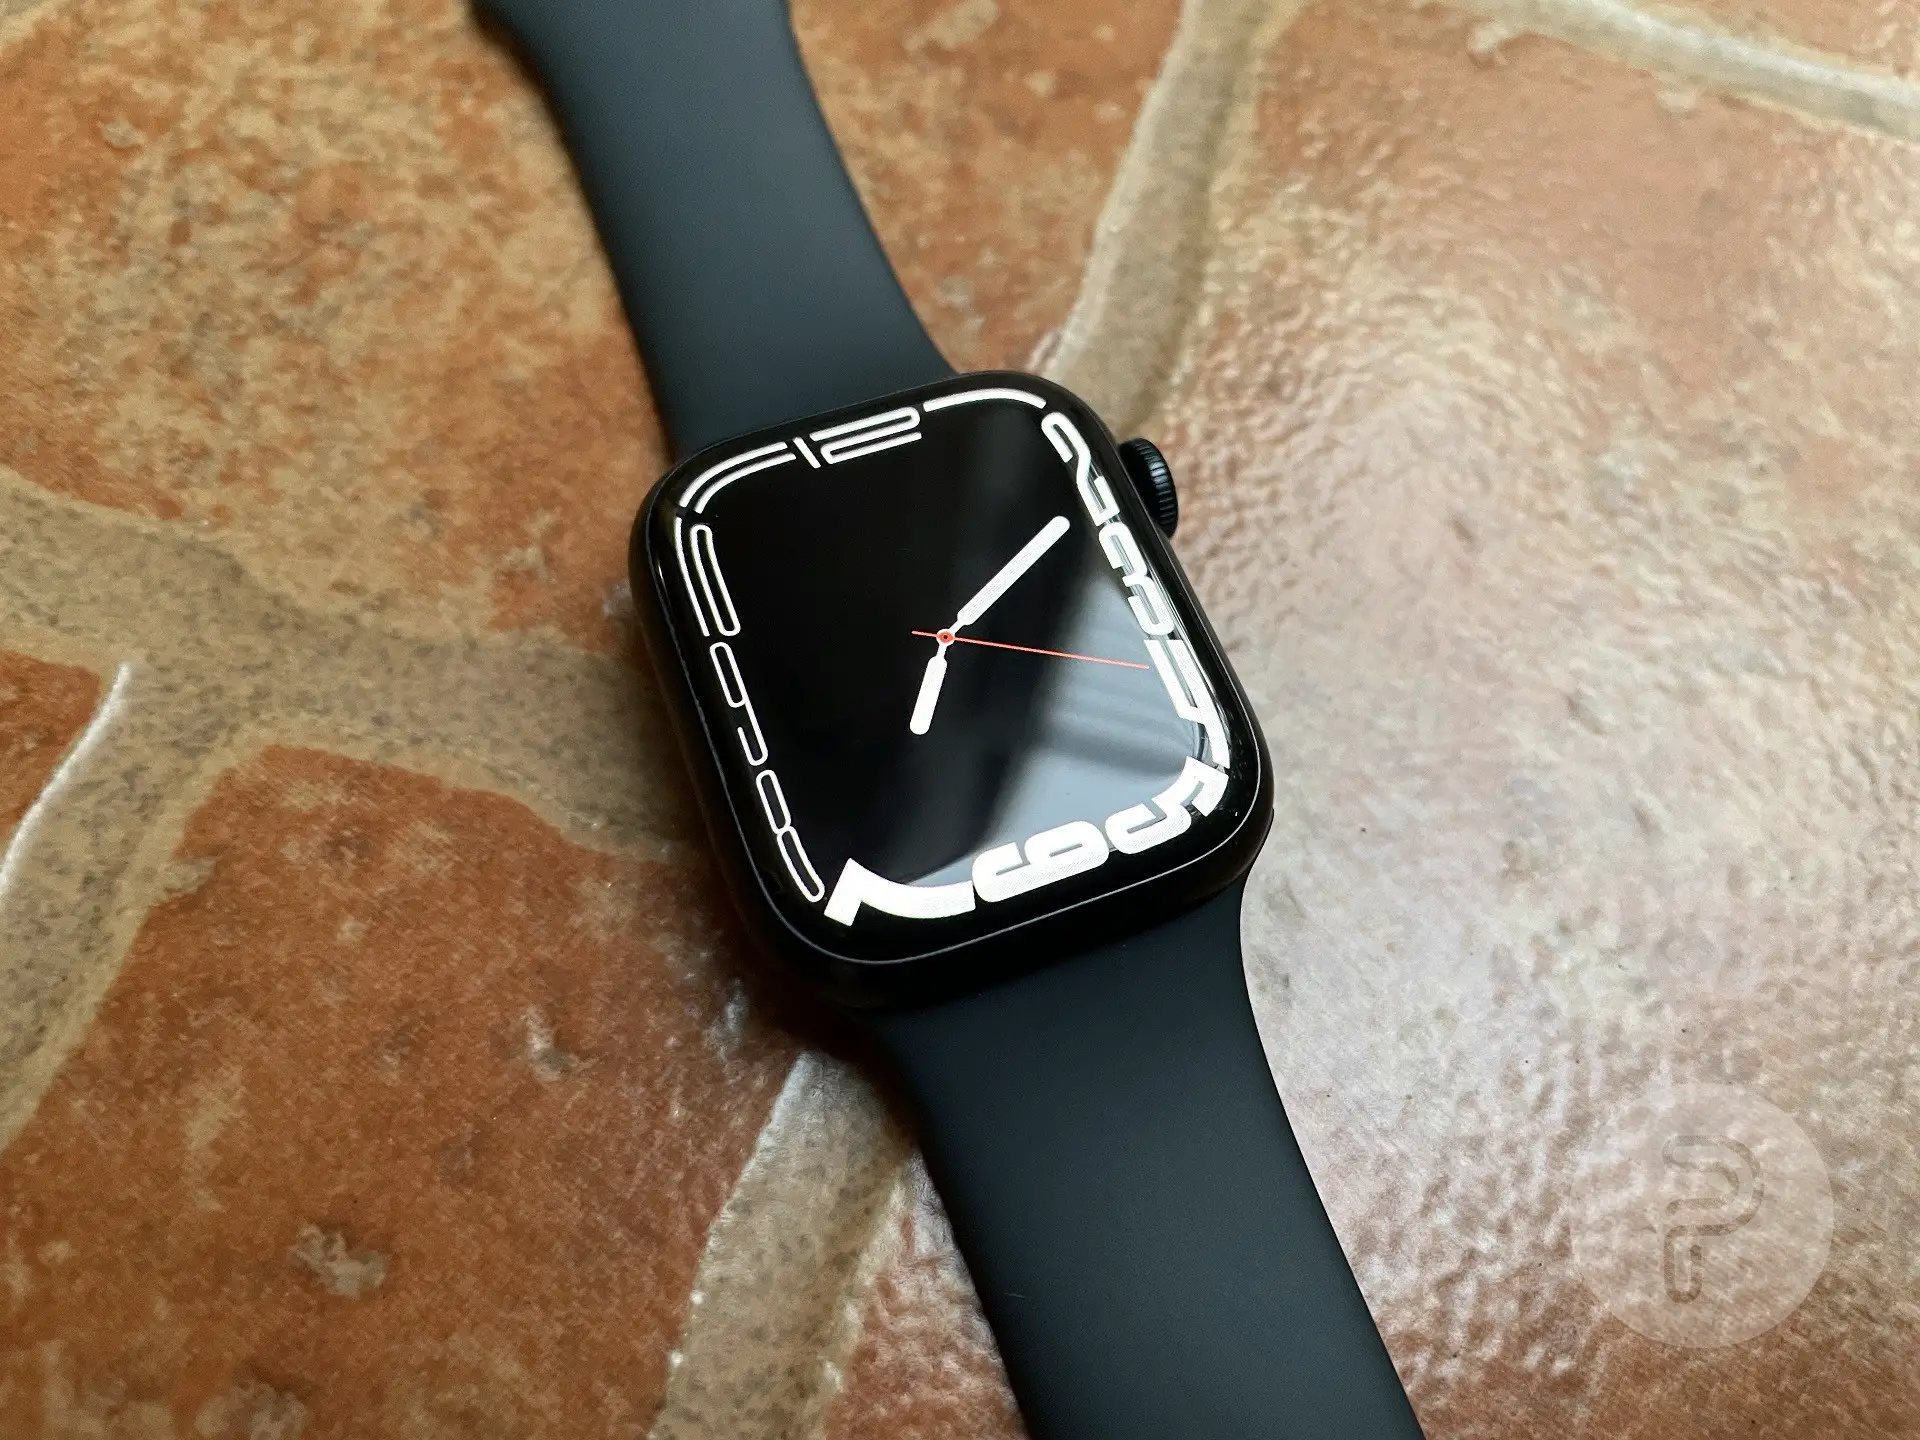 Apple Watch Series 7 placed on a tiled surface